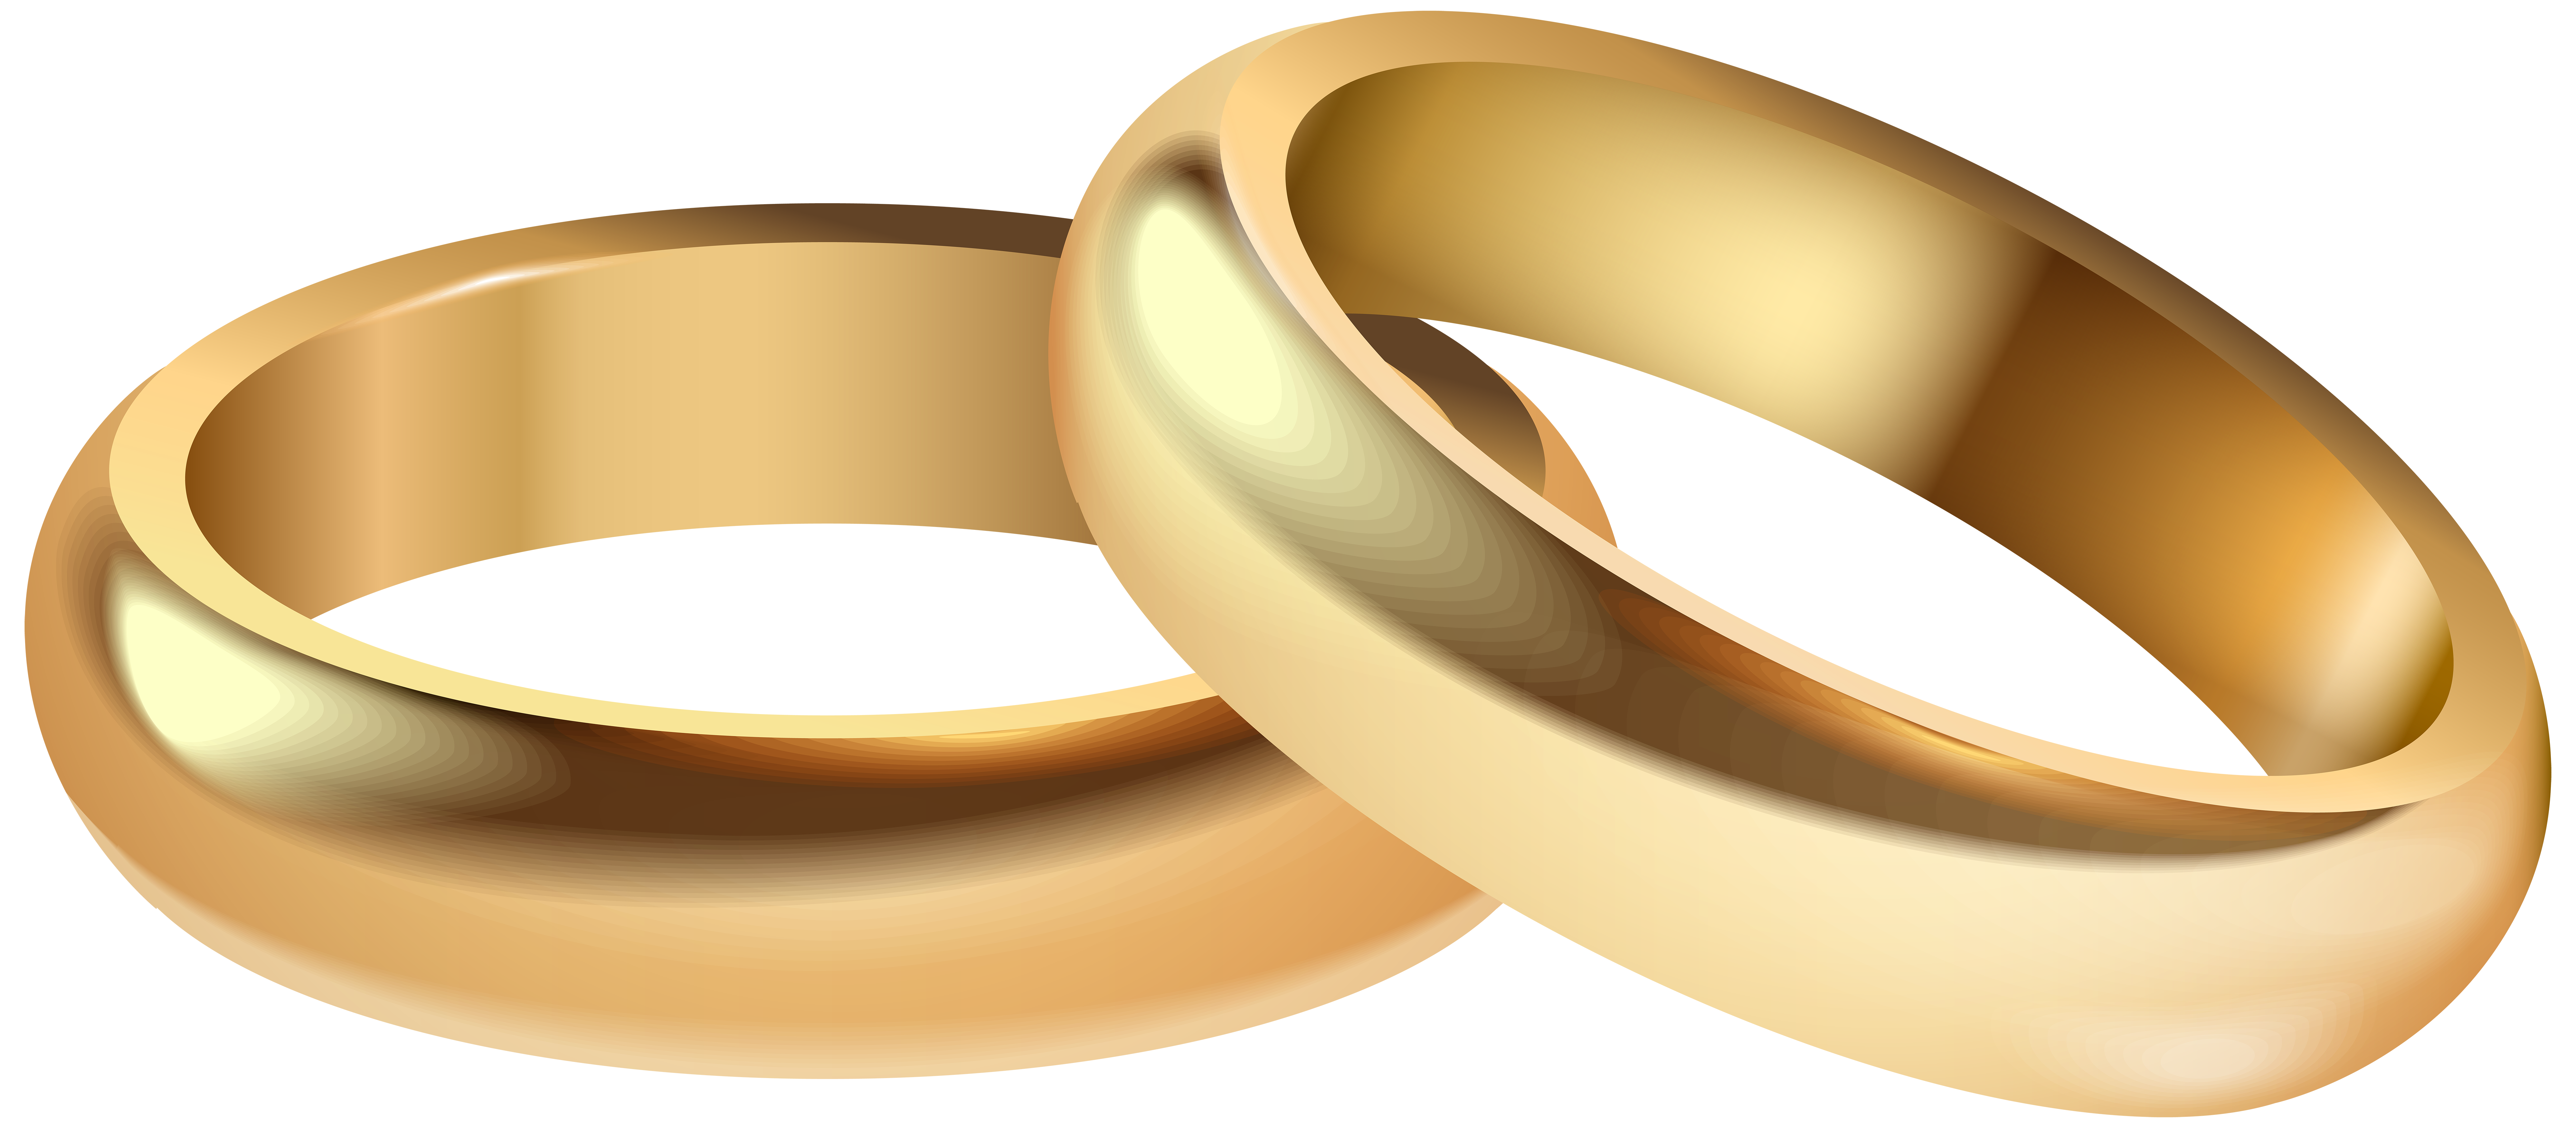 Ring Ceremony png download - 2768*3171 - Free Transparent Wedding Ring png  Download. - CleanPNG / KissPNG